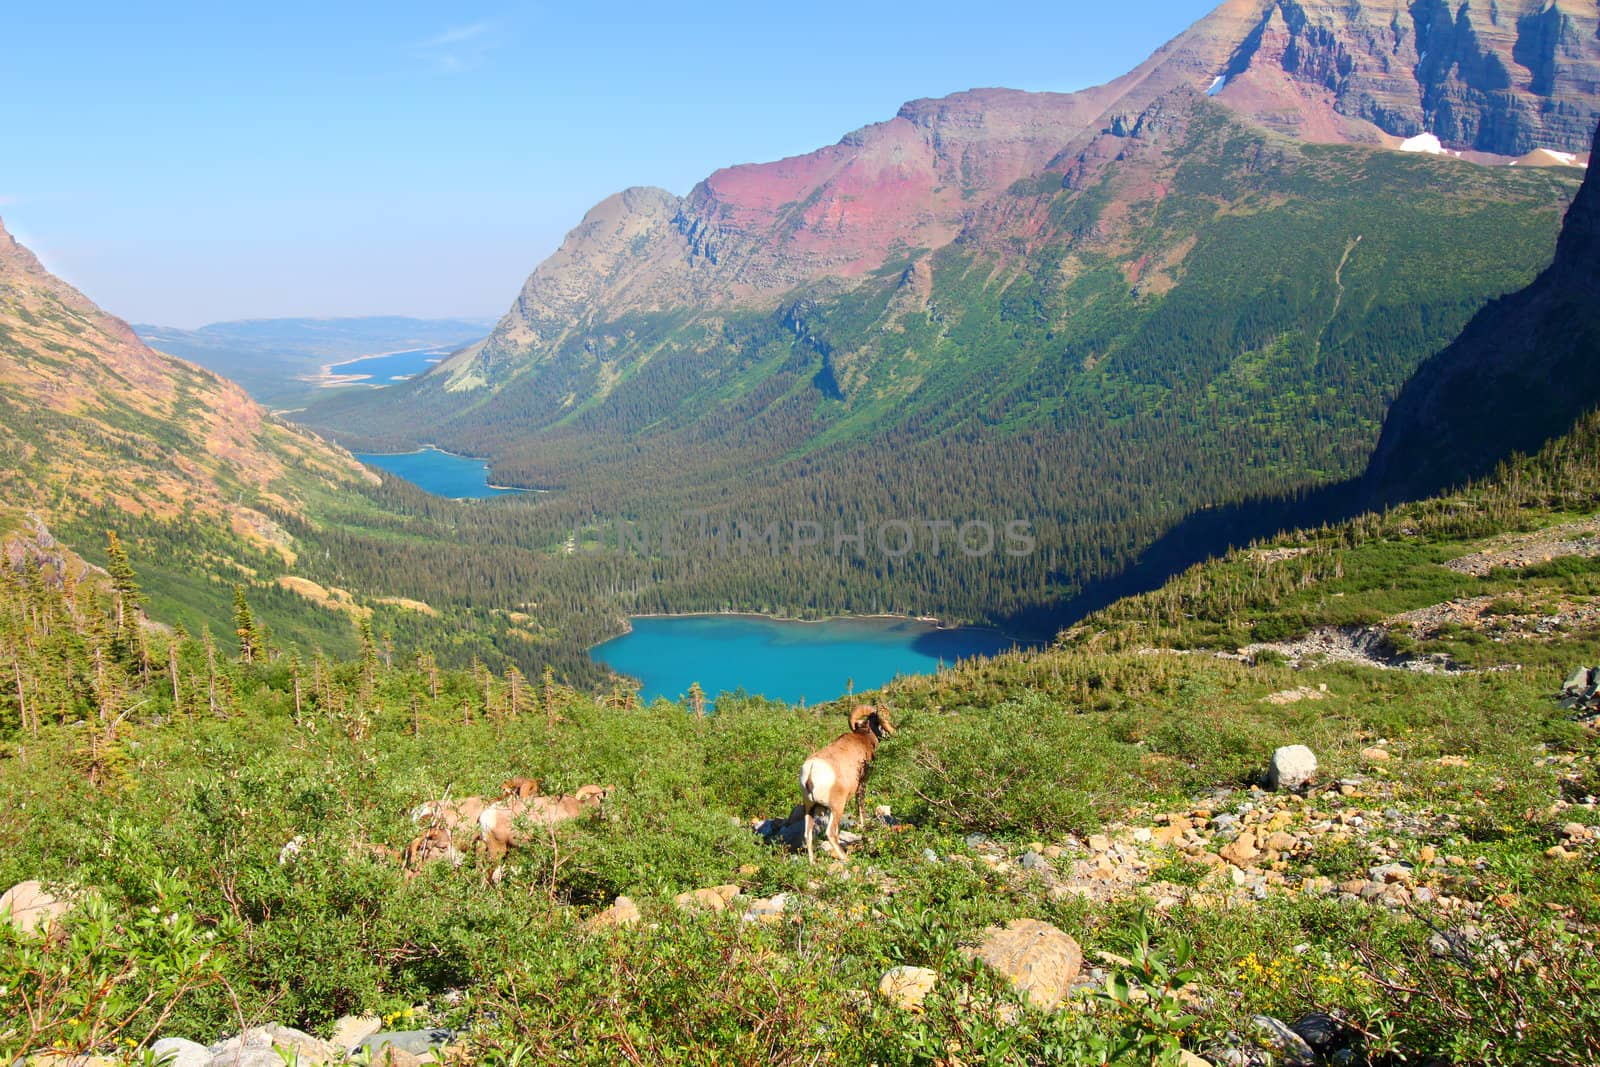 Bighorn sheep (Ovis canadensis) graze near Grinnell Lake in Glacier National Park of Montana.